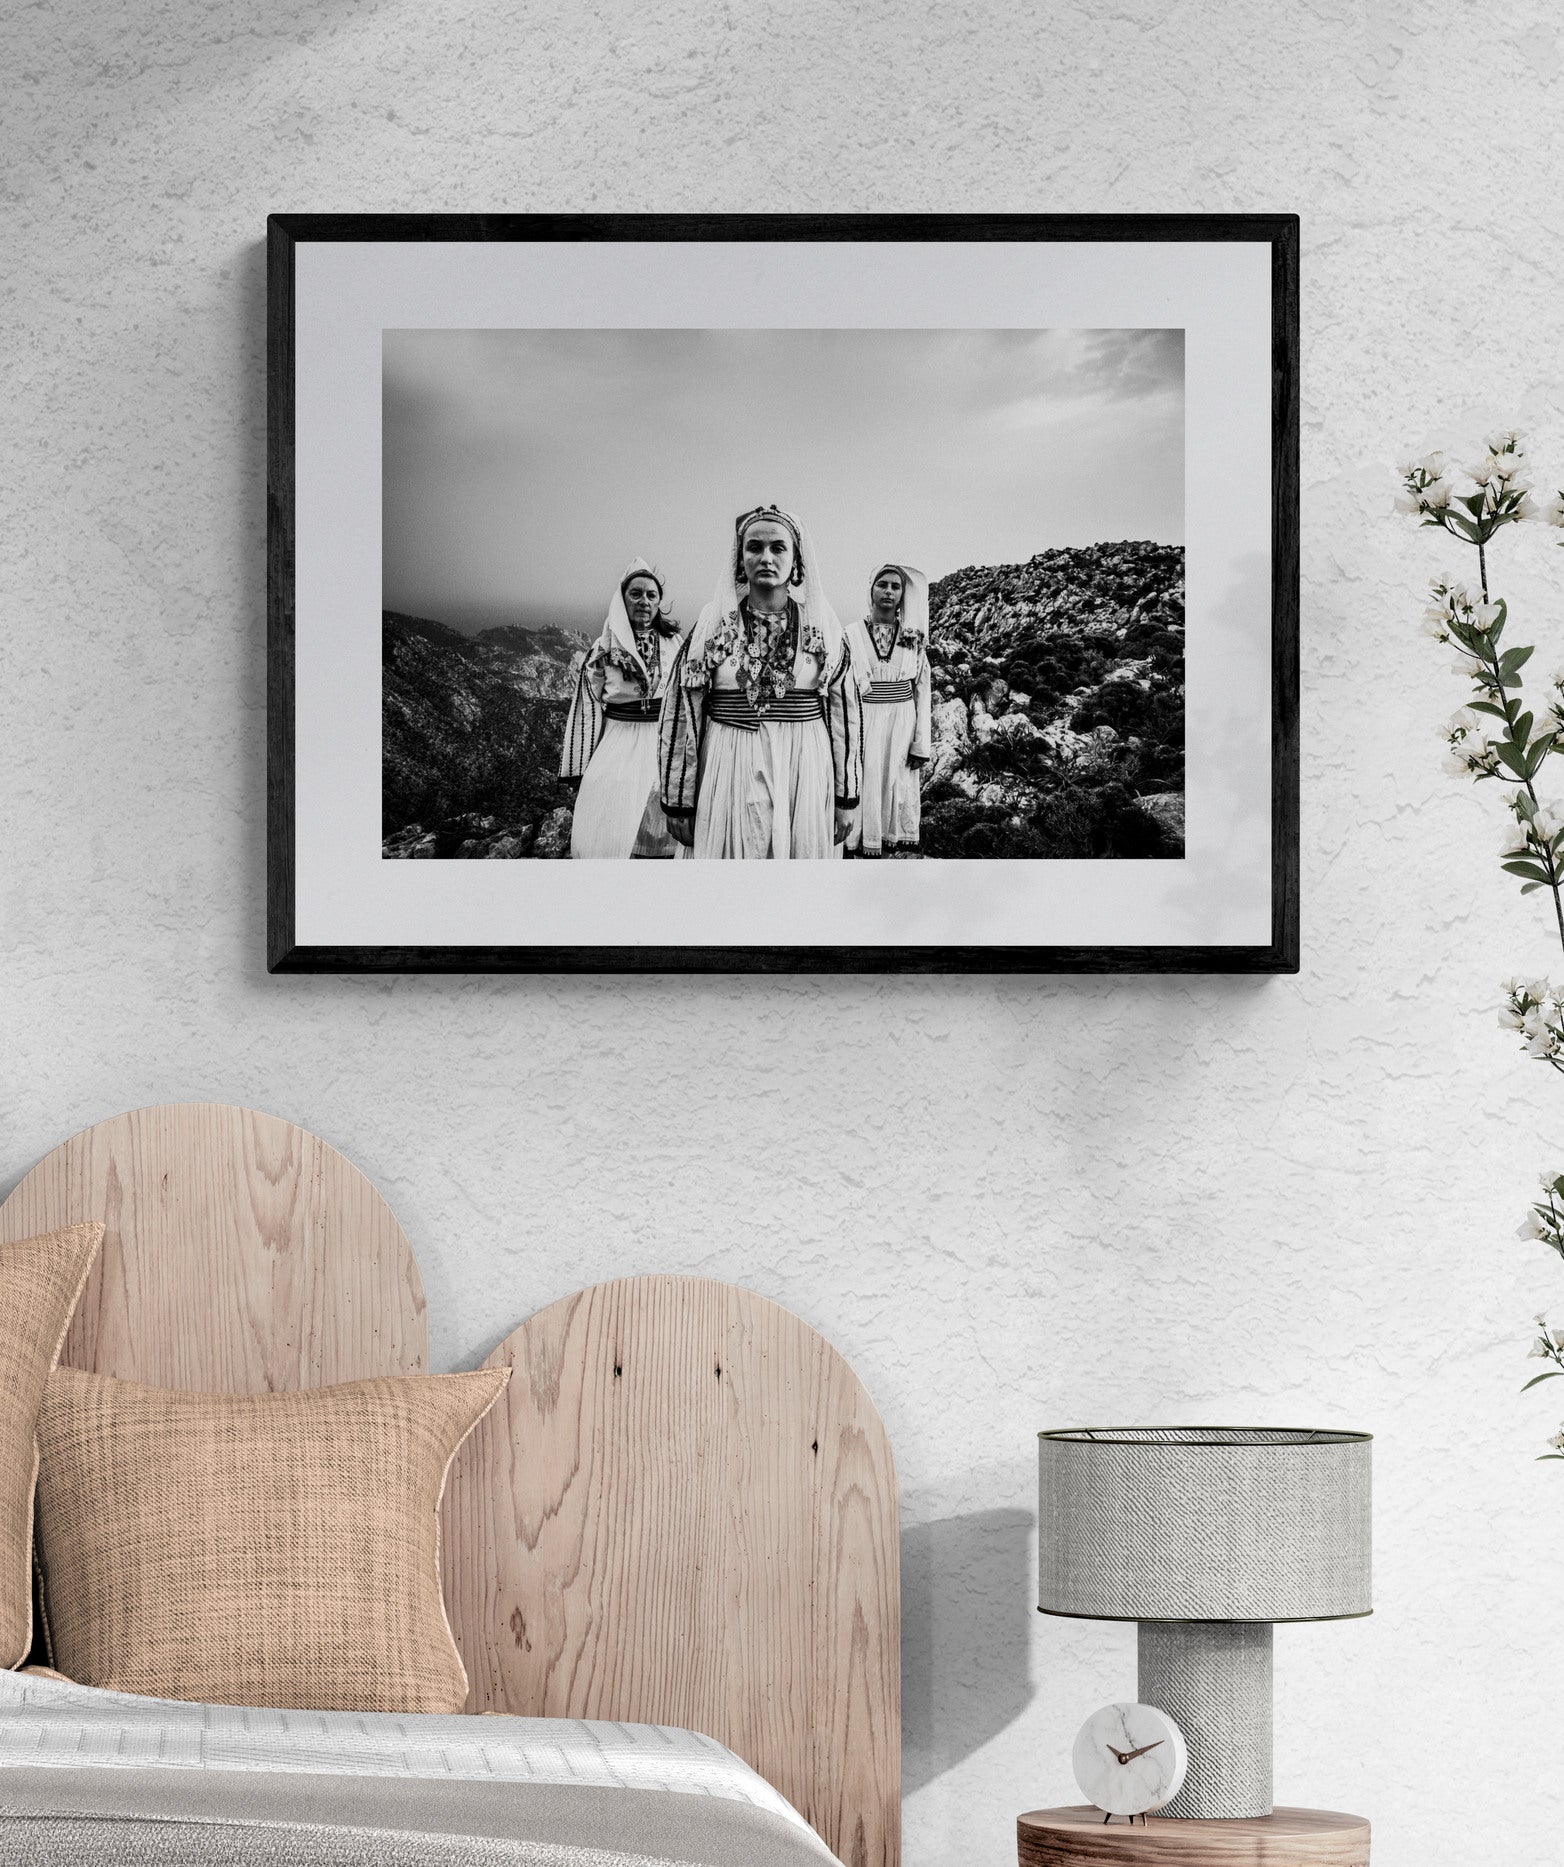 Black and White Photography Wall Art Greece | Costumes of Tilos island at a cliff Dodecanese Greece by George Tatakis - single framed photo